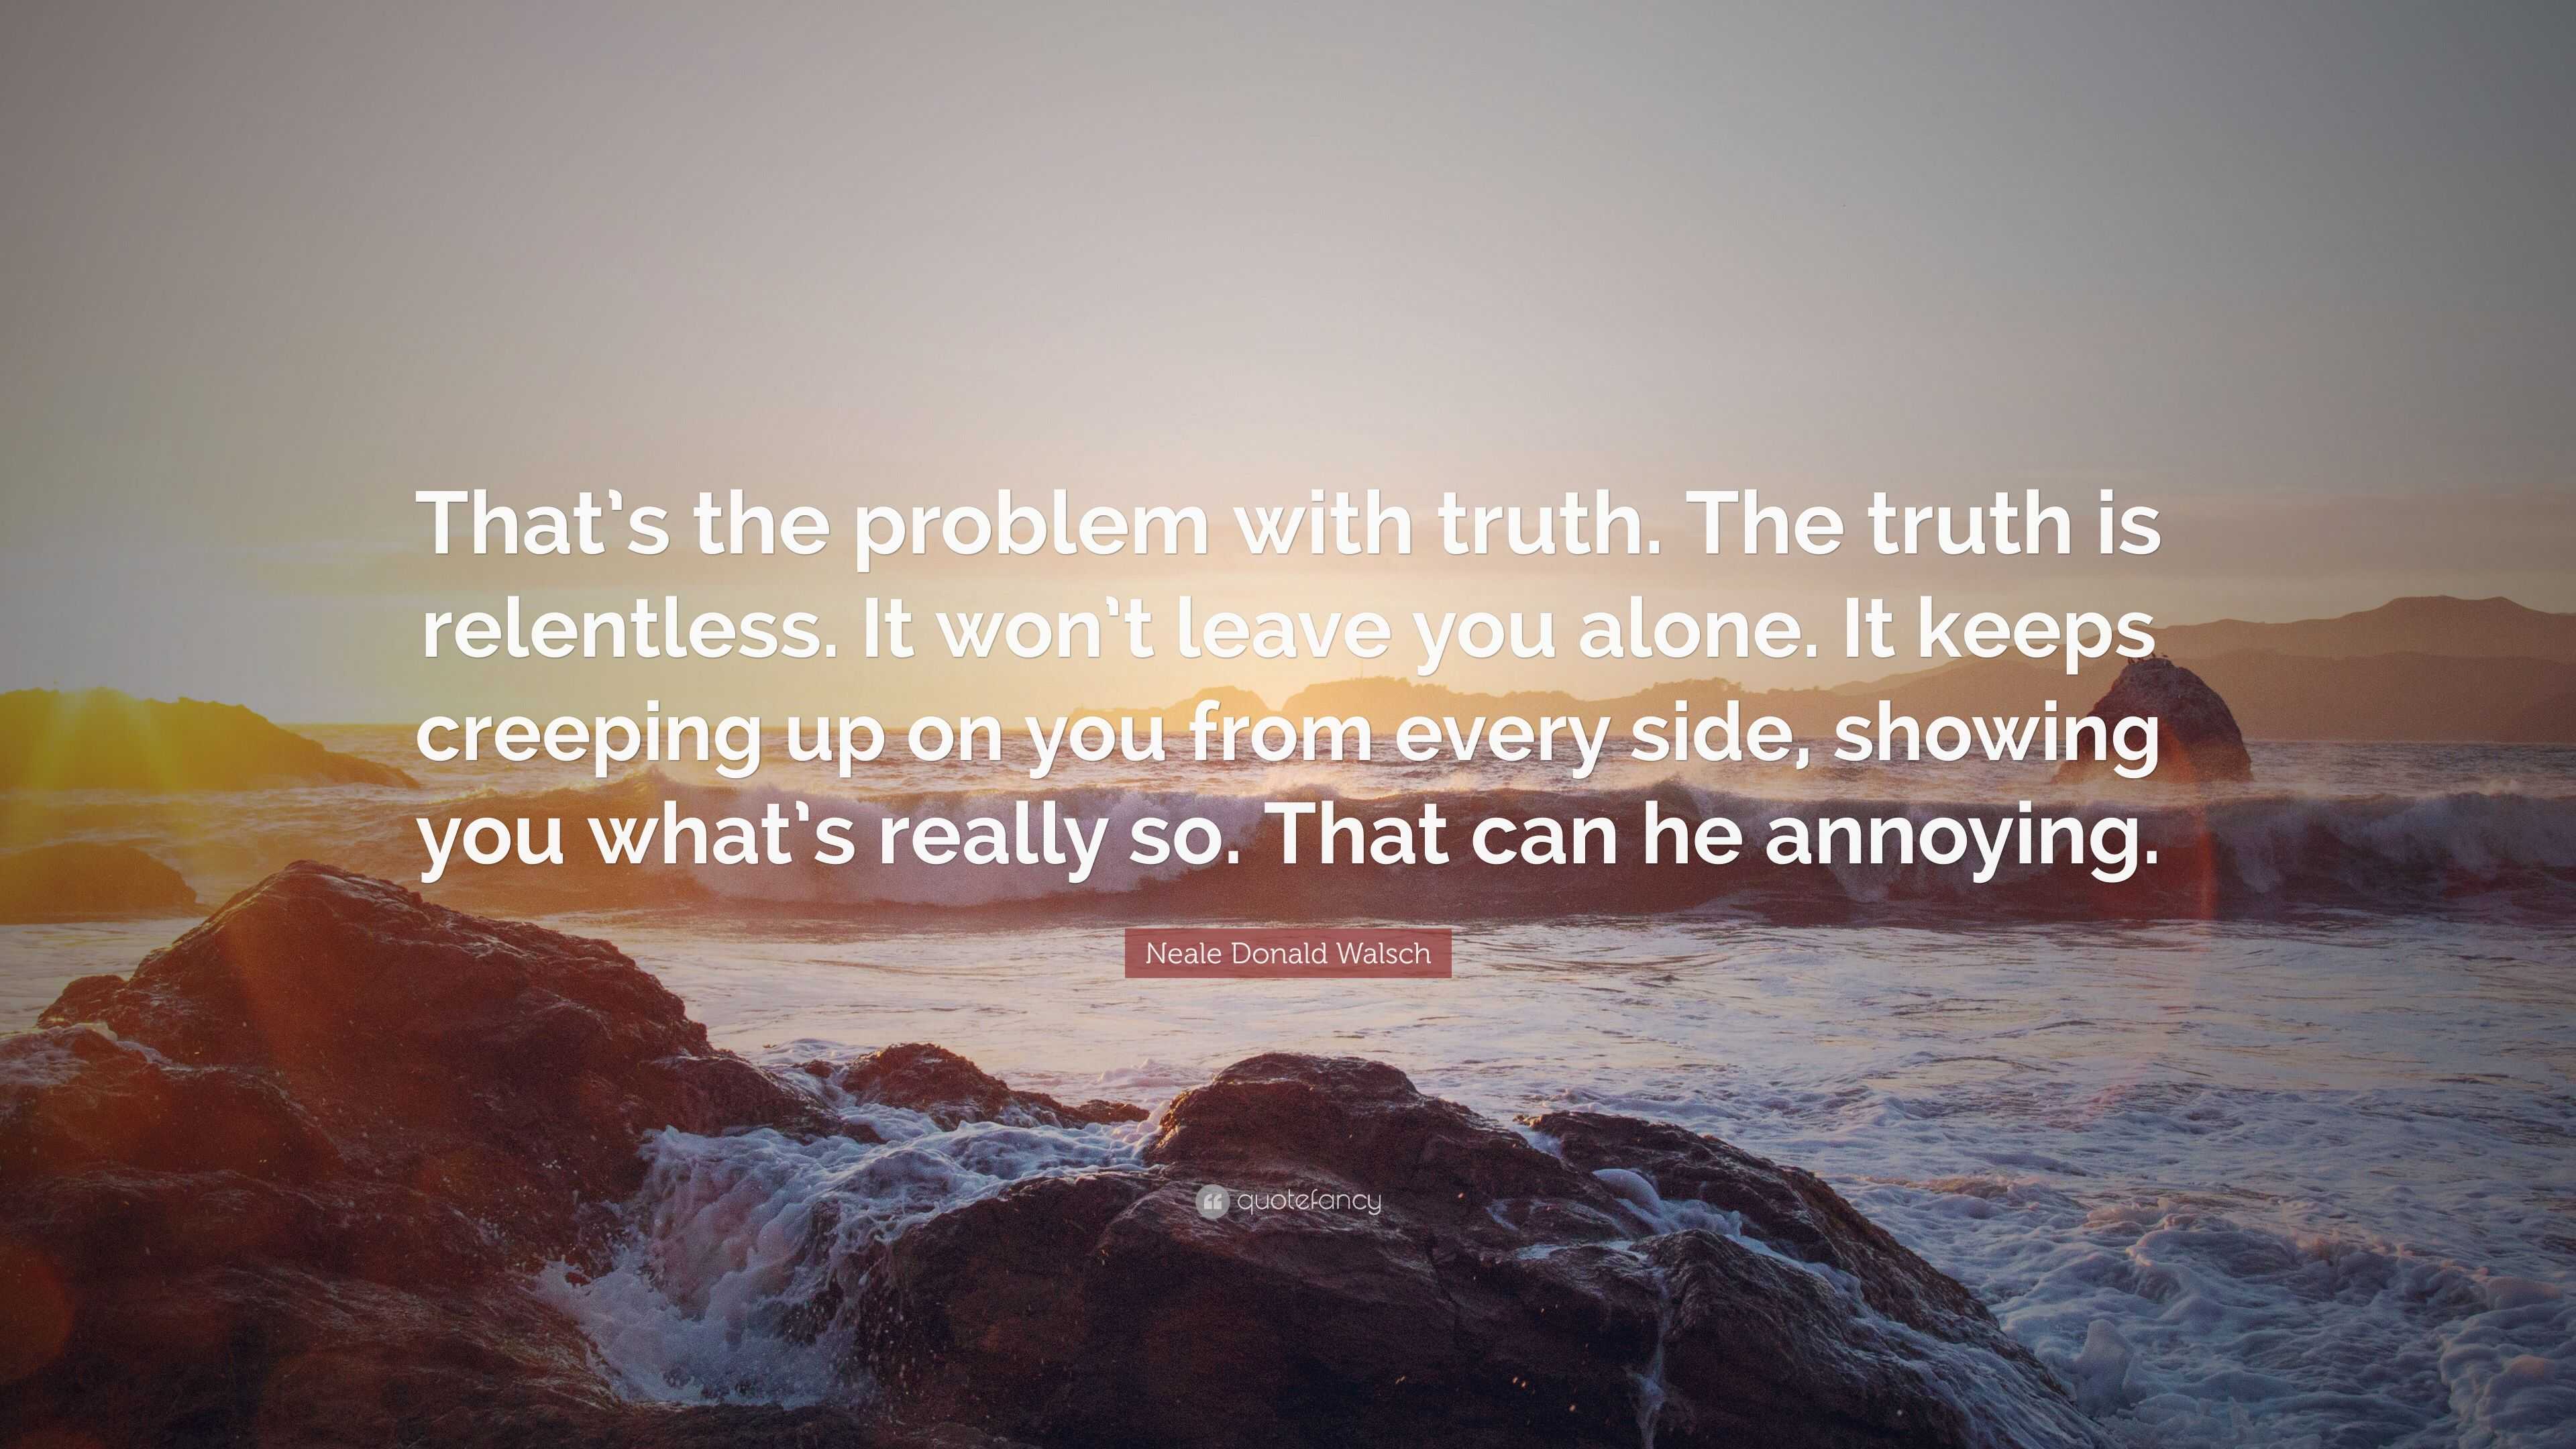 Neale Donald Walsch Quote That S The Problem With Truth The Truth Is Relentless It Won T Leave You Alone It Keeps Creeping Up On You From Every 6 Wallpapers Quotefancy